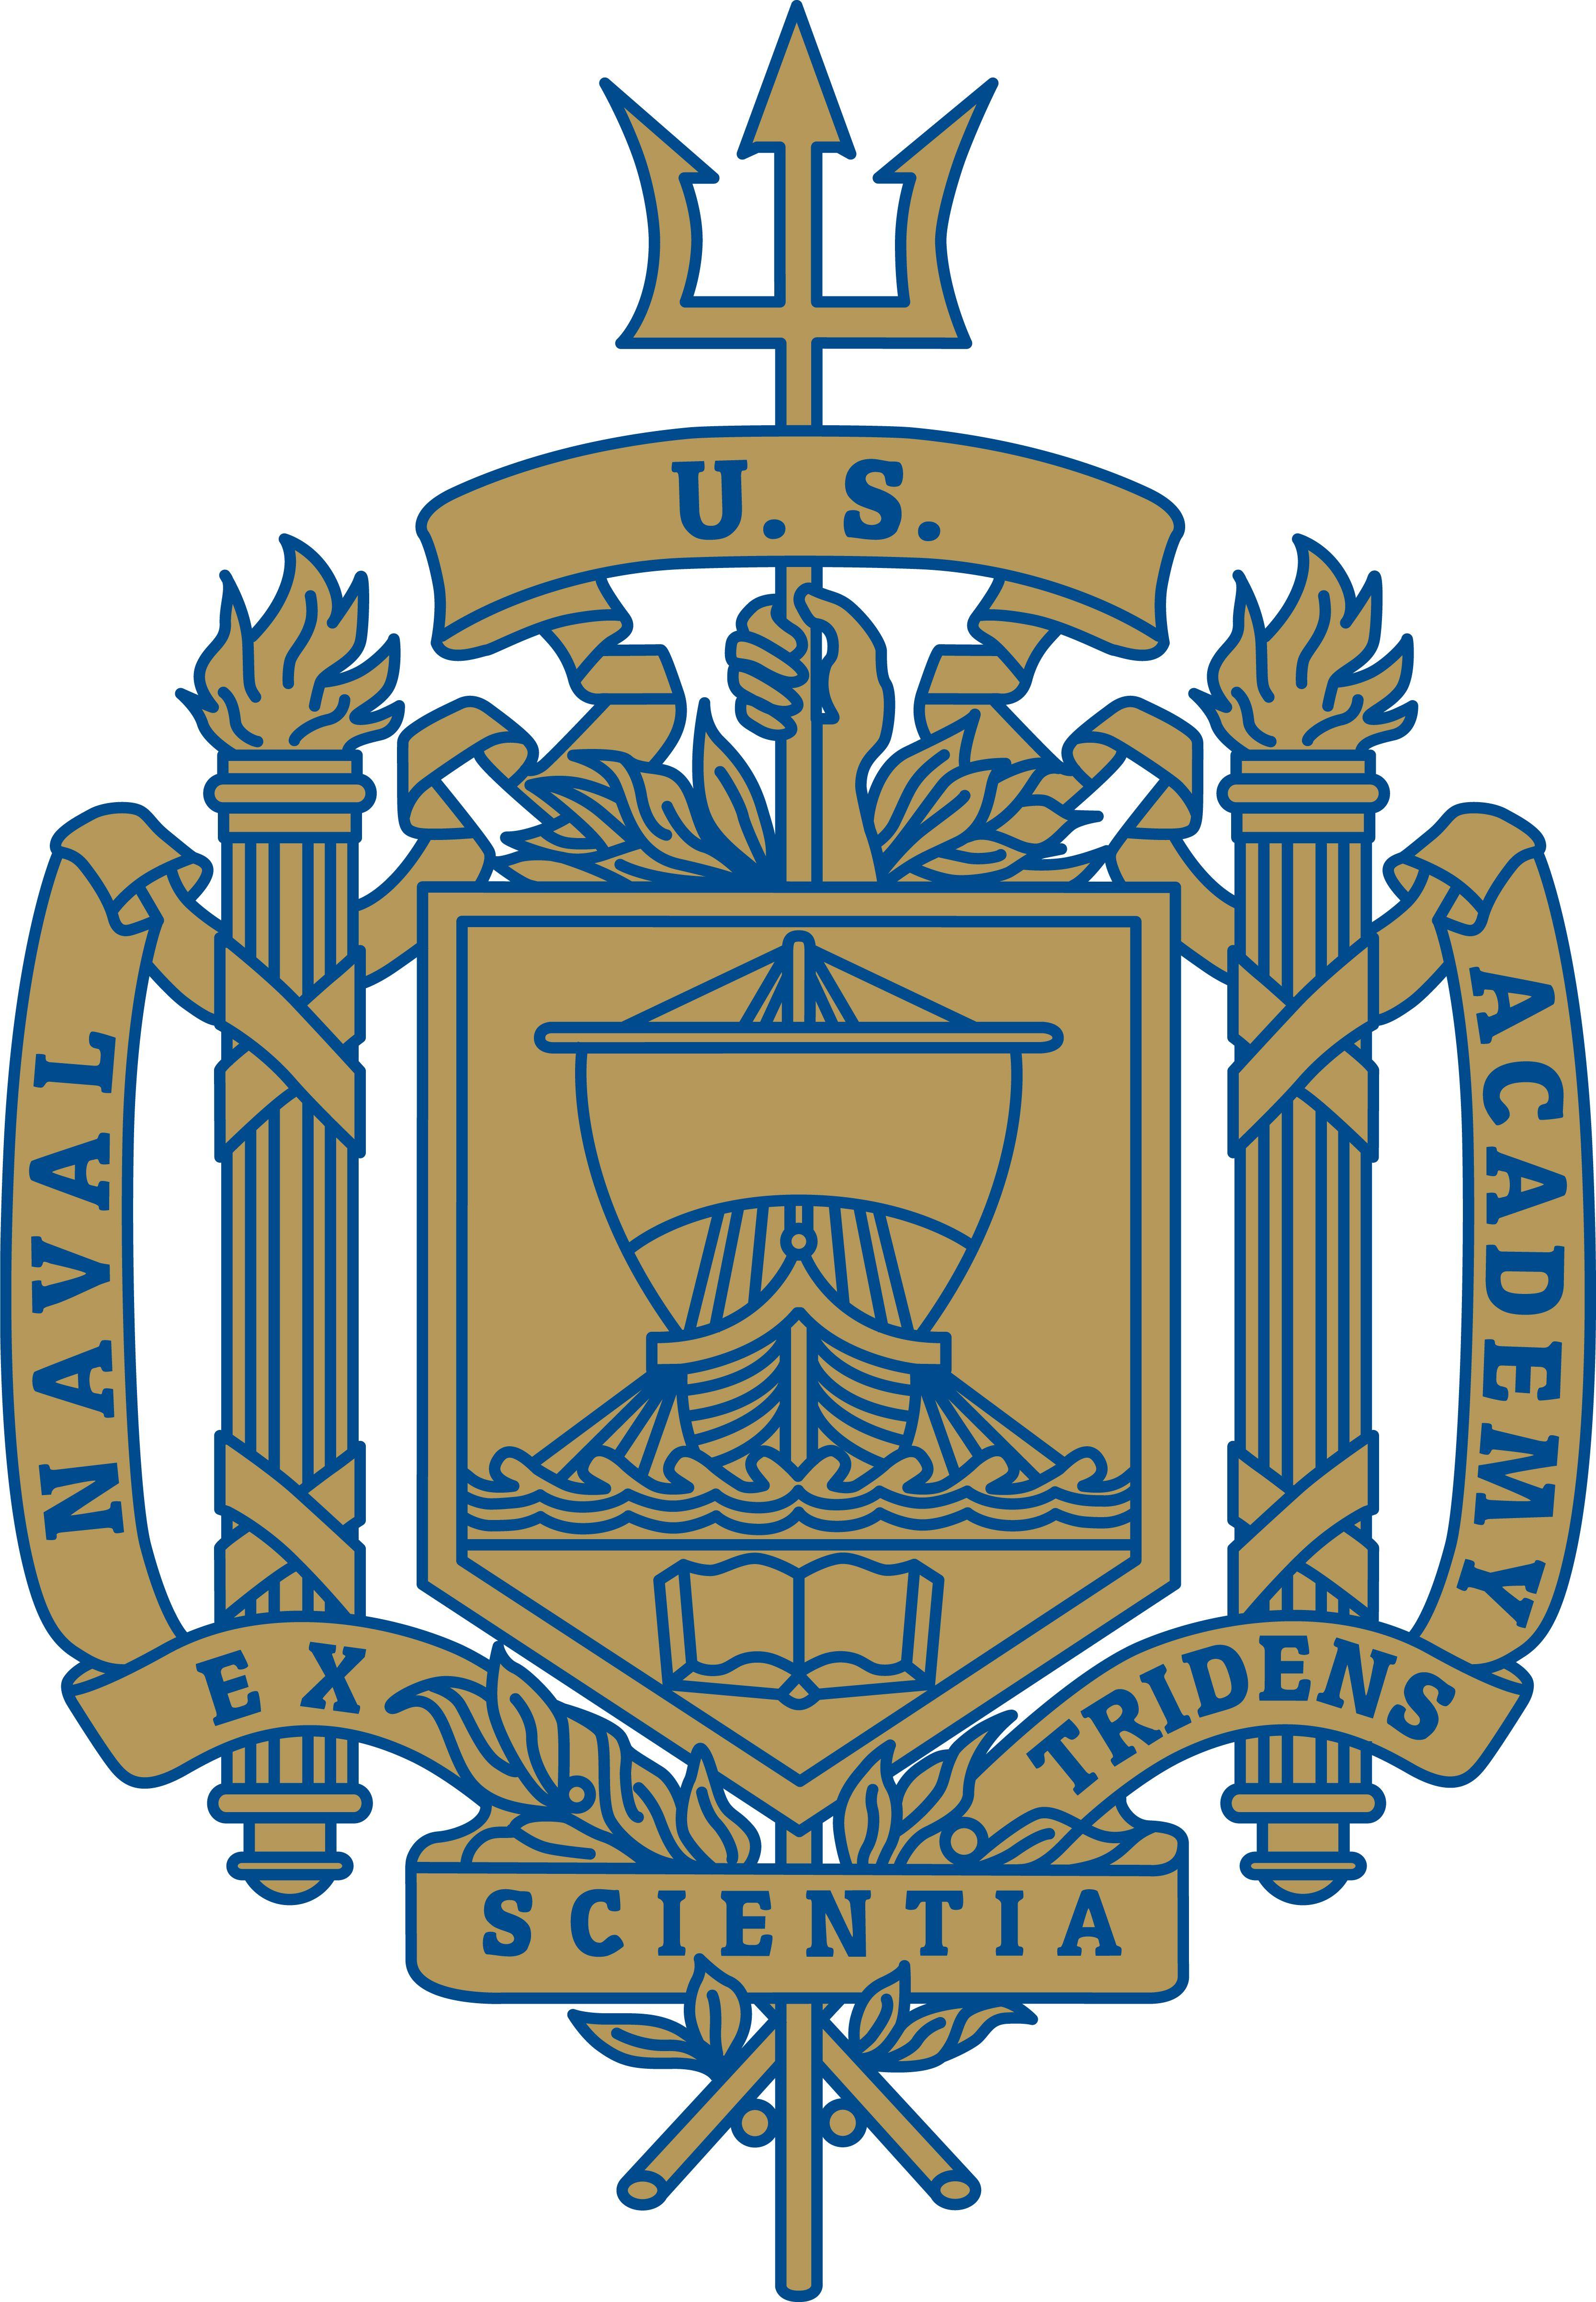 United States Naval Academy Logo - United States Naval Academy Trident Logo | Graduation announcements ...